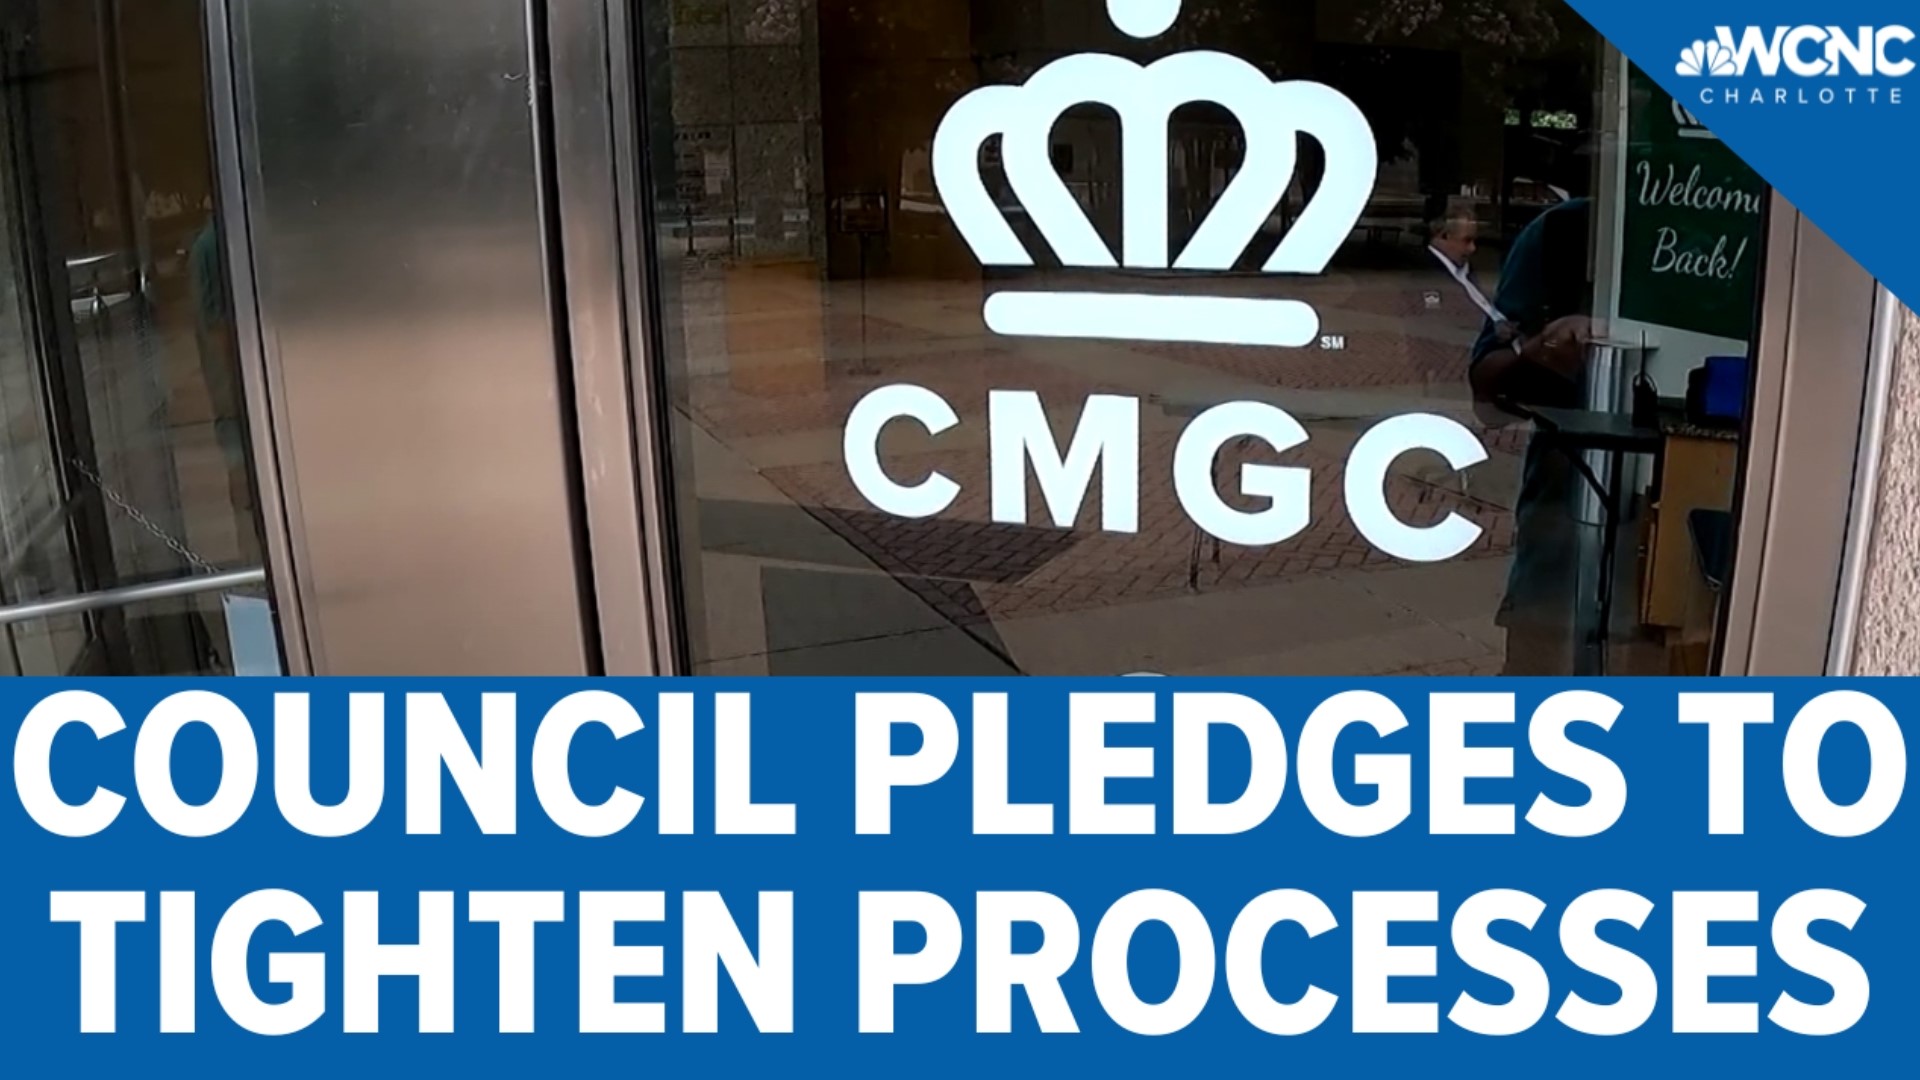 Council pledged to tighten up its processes to ensure certified minority, women and small business enterprises get a fair shot at government work.